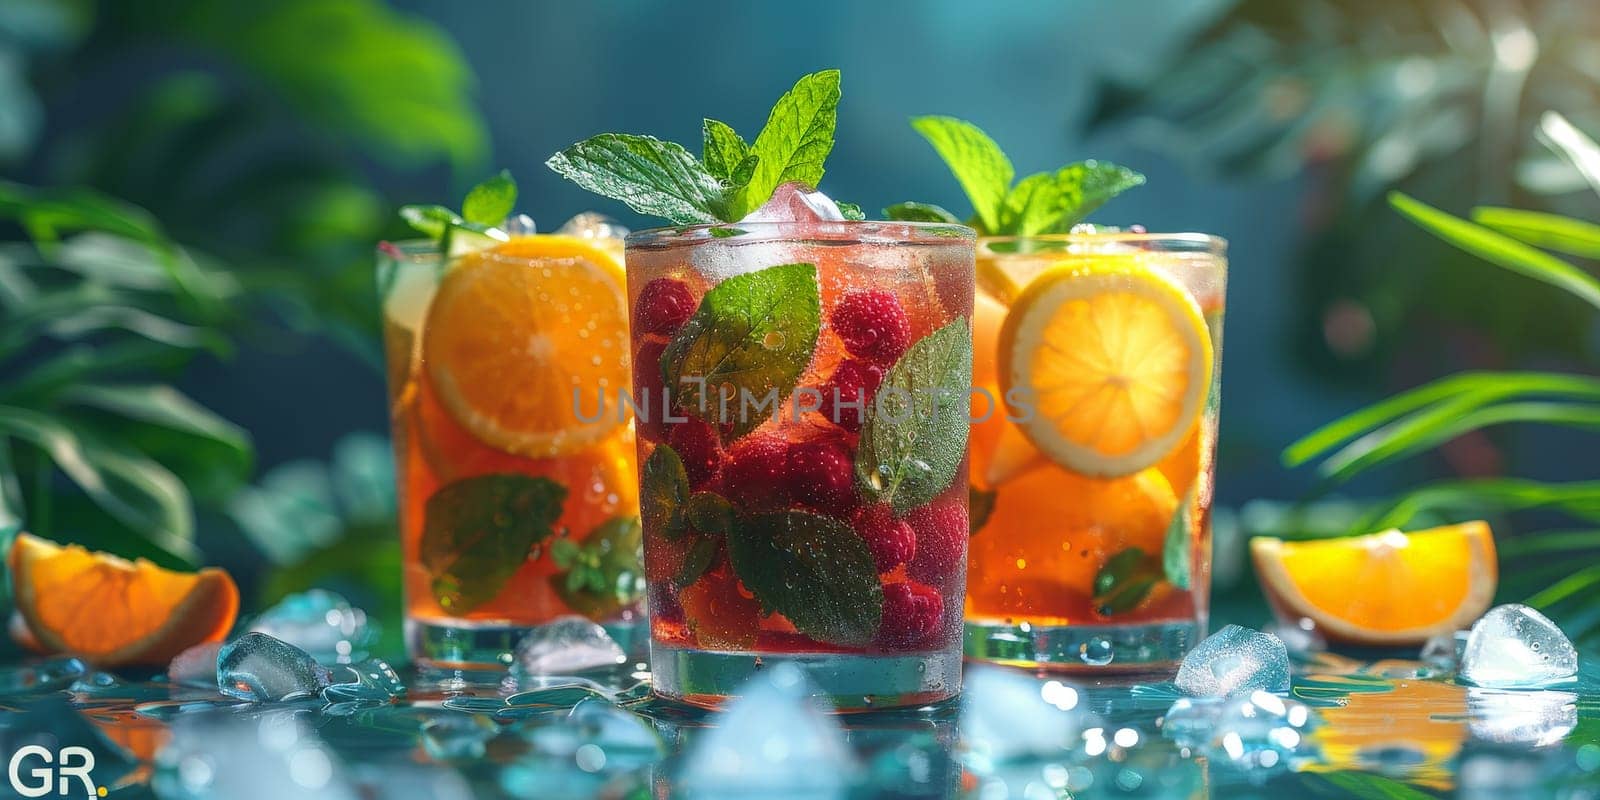 Three glasses of mixed fruit drinks with ice cubes and mint leaves. The drinks are served in a tropical setting with palm trees and a blue background